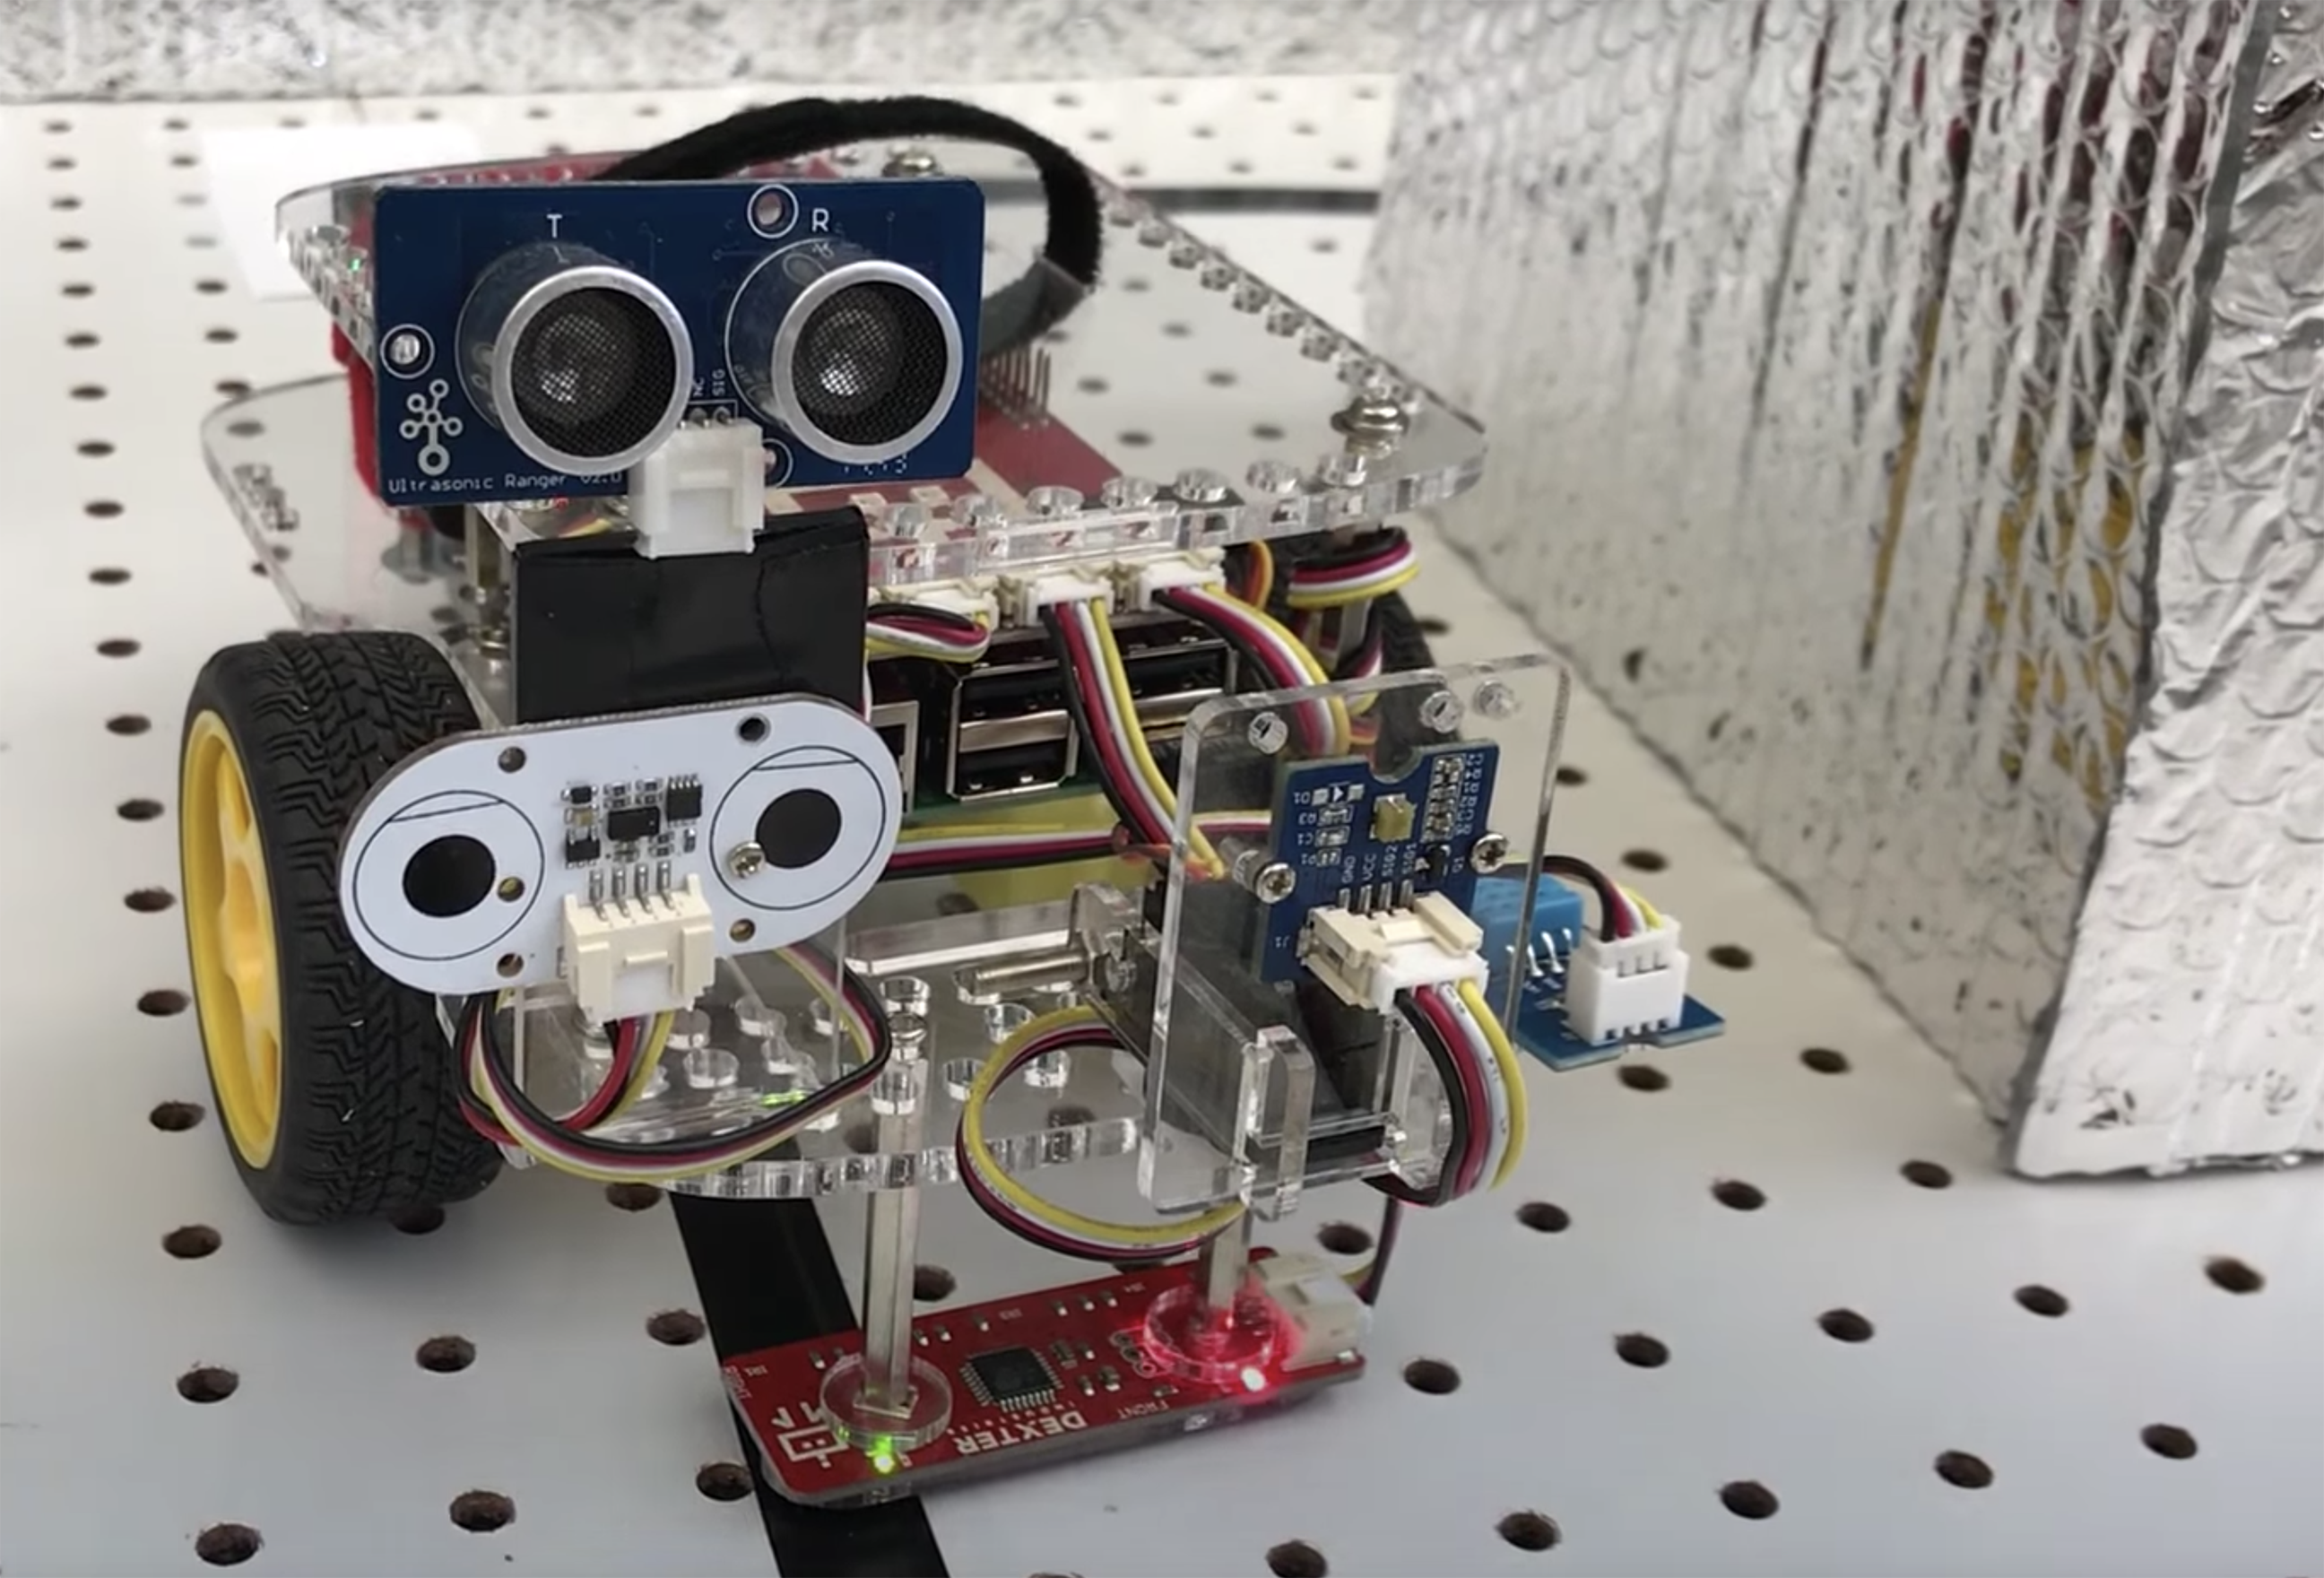 Cybersecurity experts have a new tool in the fight against hackers – a decoy robot. Researchers at Georgia Tech built the “HoneyBot” to lure hackers into thinking they had taken control of a robot, but instead the robot gathers valuable information about the bad actors, helping businesses better protect themselves from future attacks.